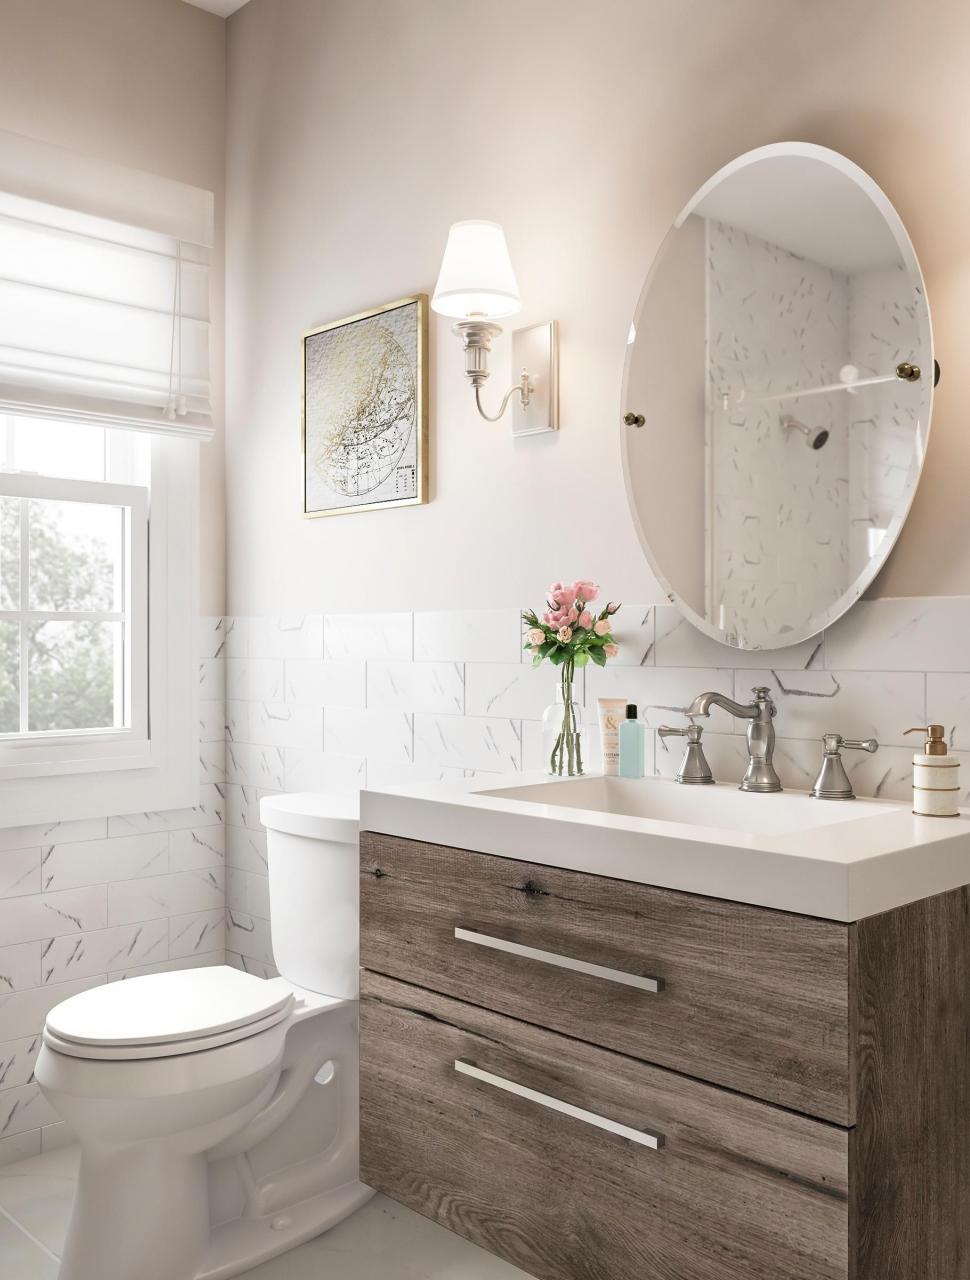 Give your bathroom a simple overhaul with mauve and oak. This is your